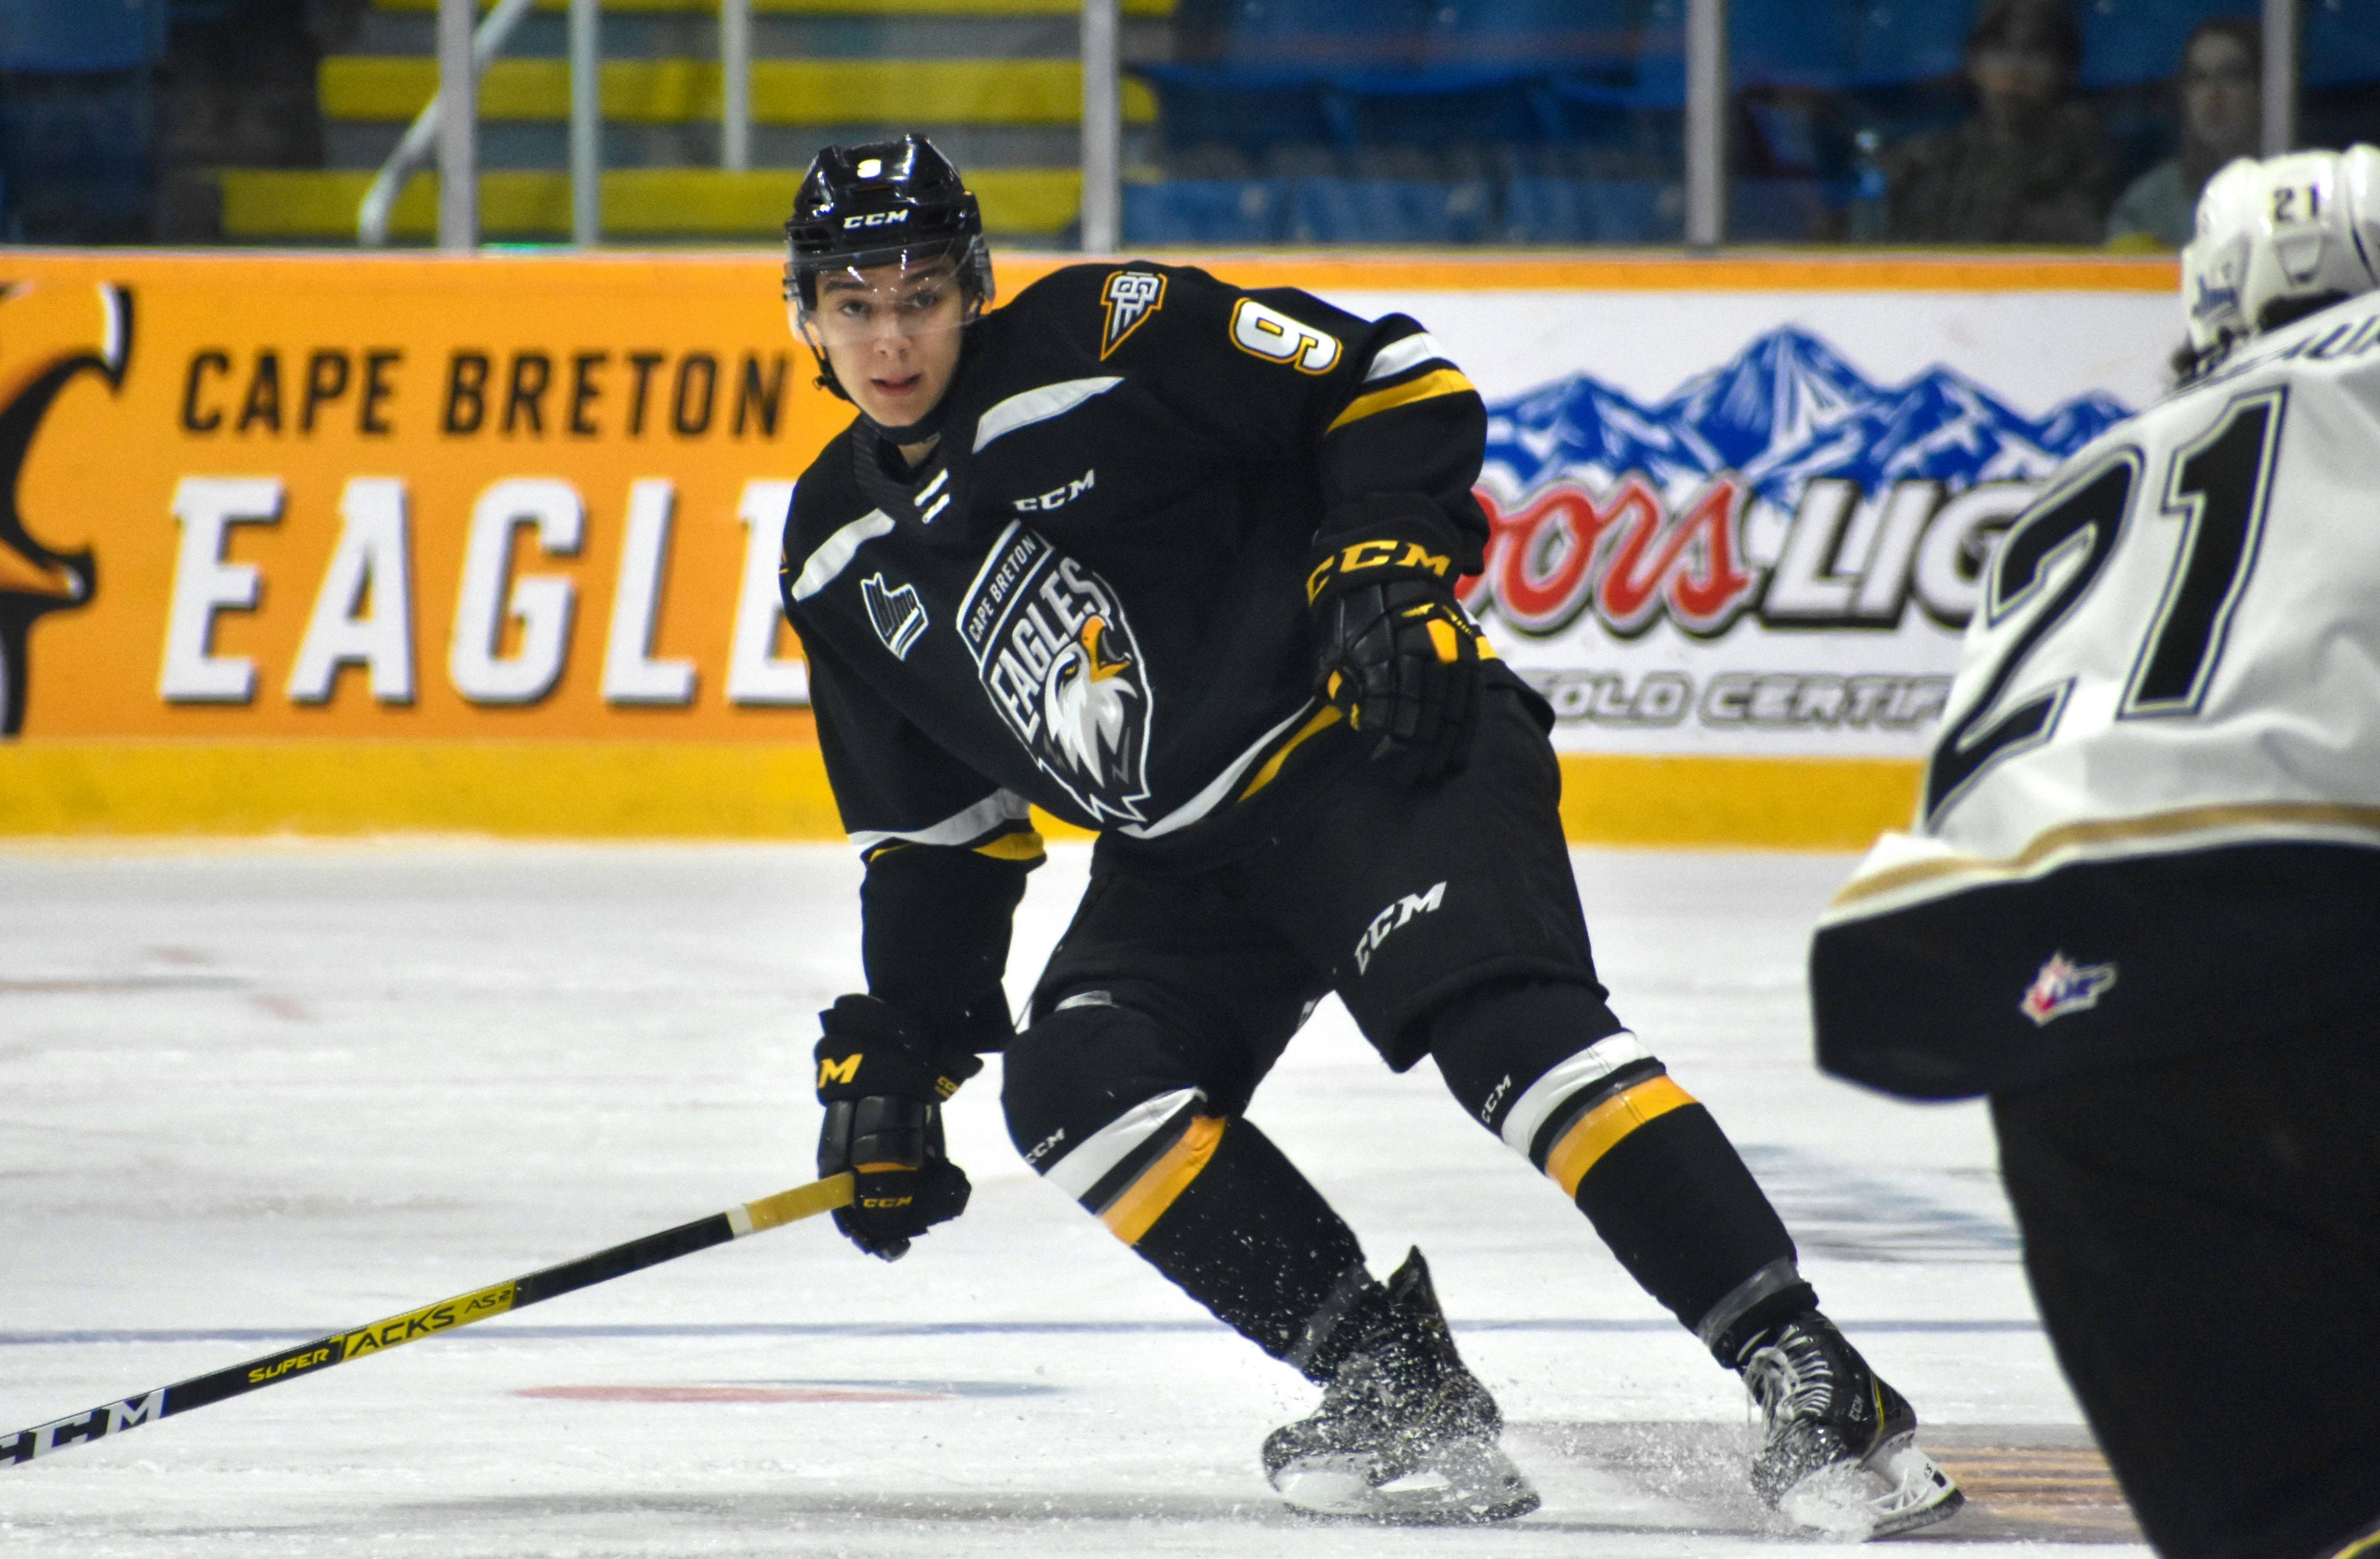 Cape Breton Screaming Eagles star Pierre-Luc Dubois could go top 5 in NHL  draft